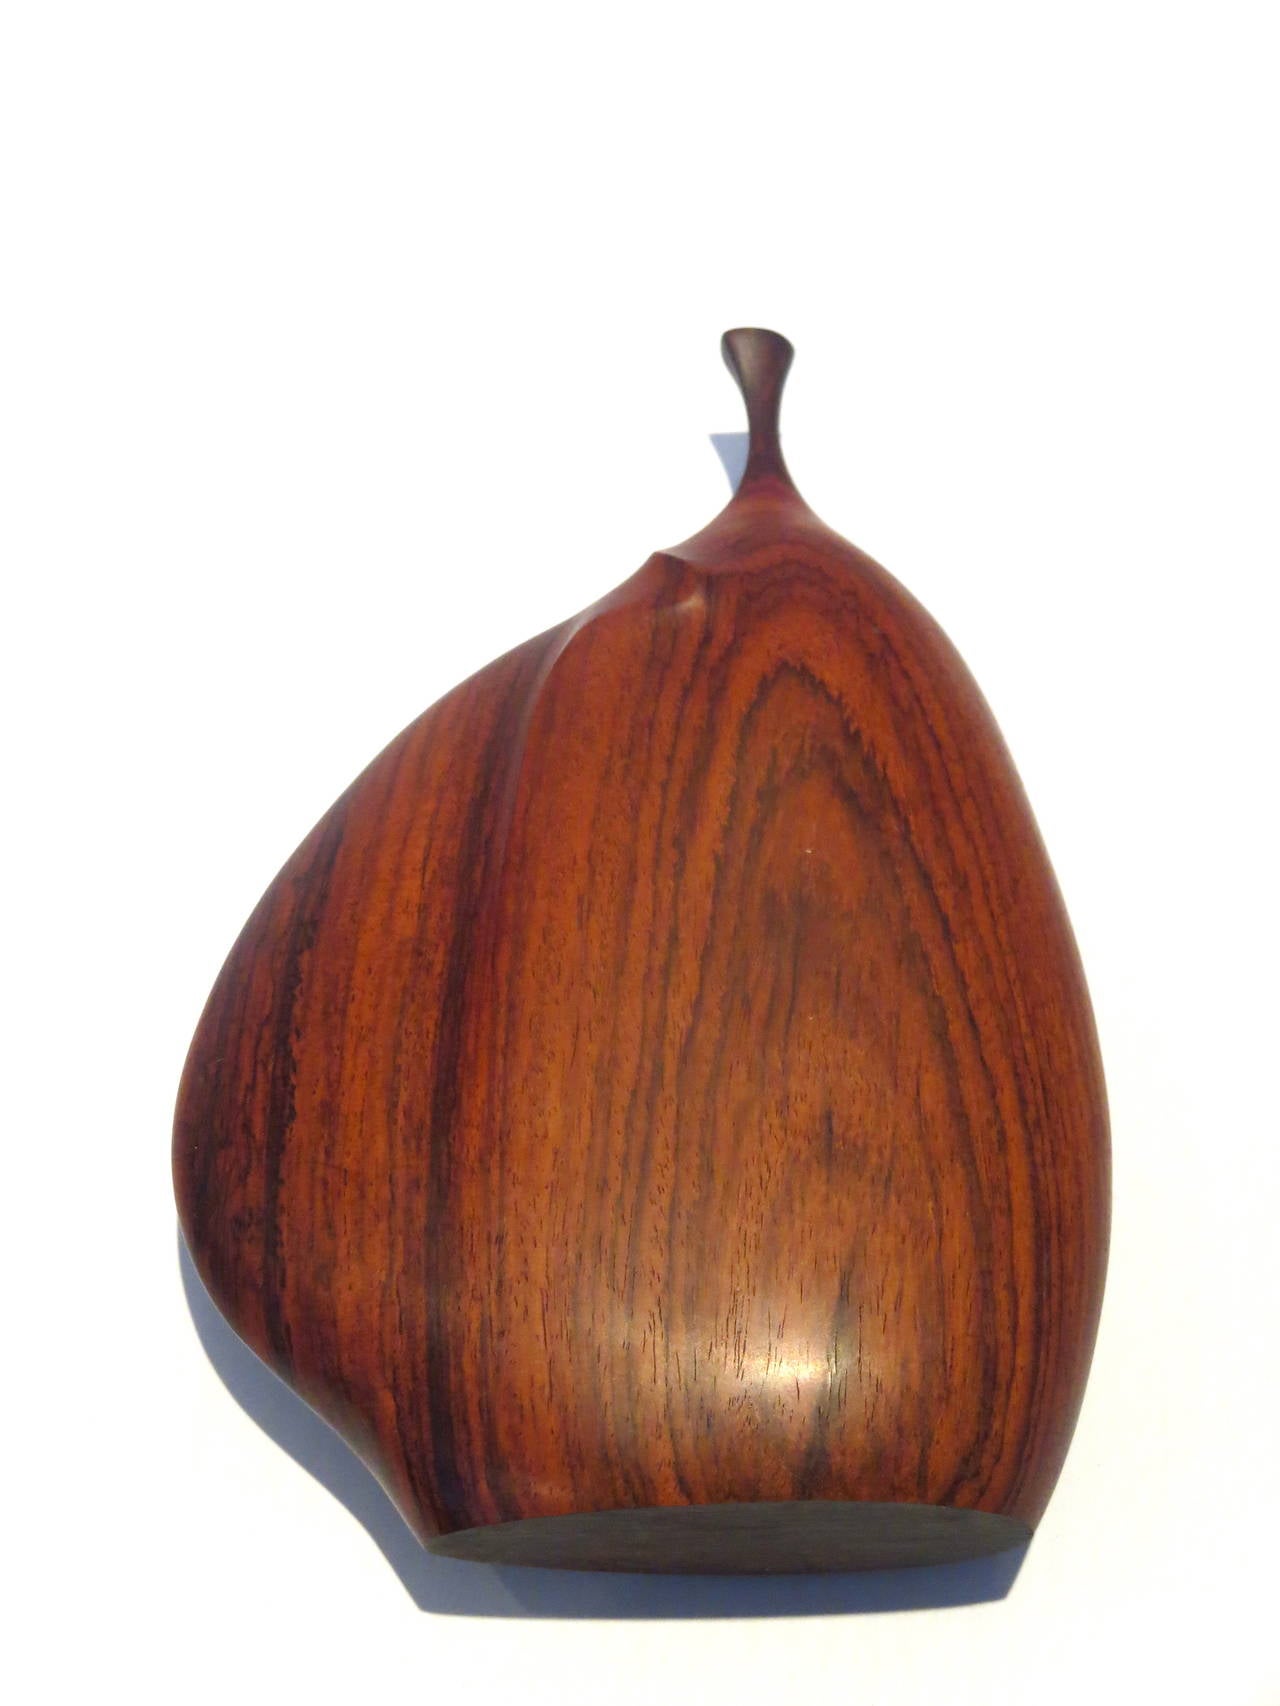 20th Century 1960s California Design Mid-Century Modern Hand-Carved Wood Vase by Doug Ayers